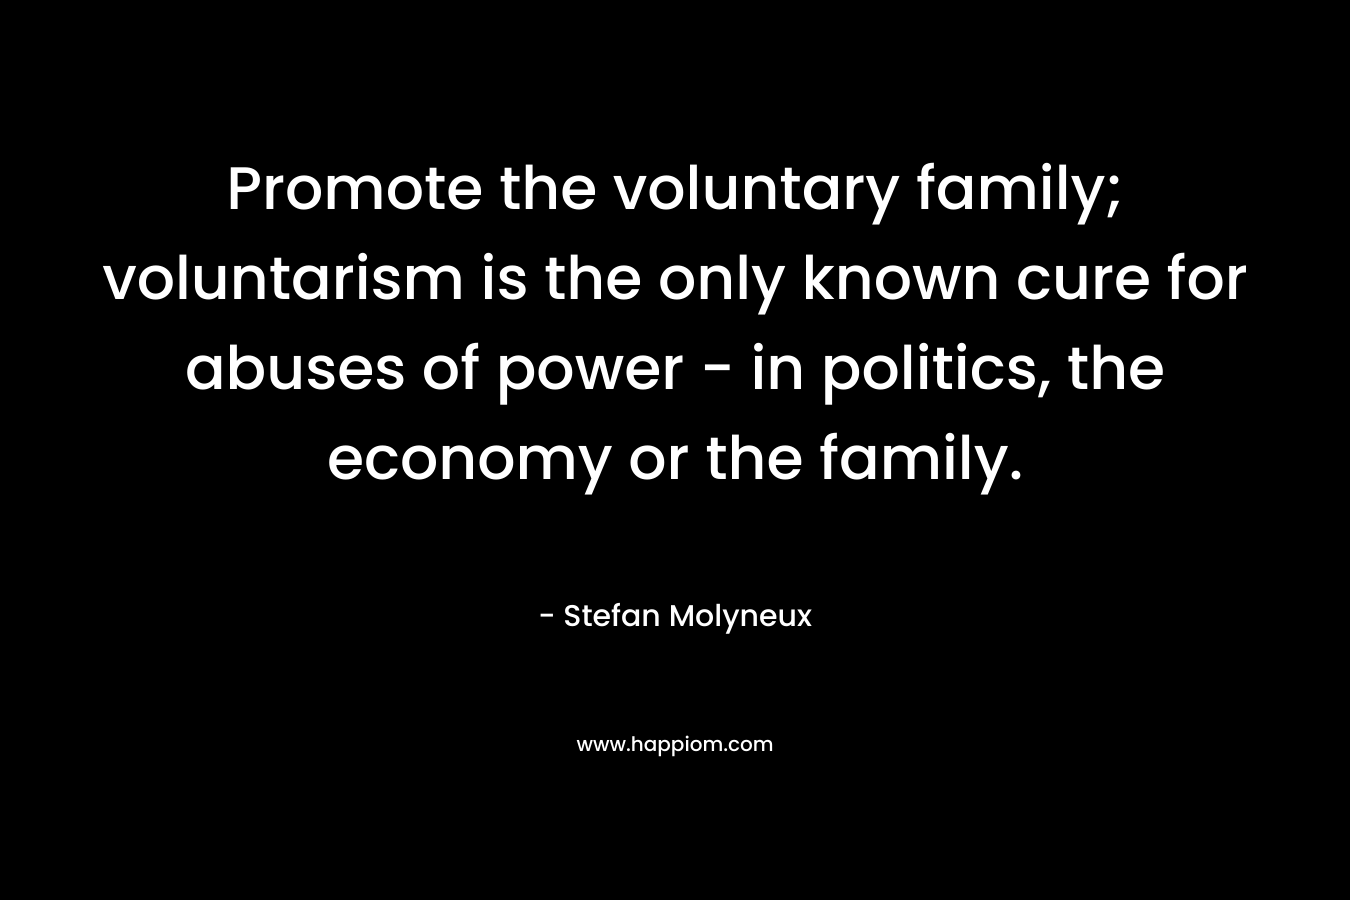 Promote the voluntary family; voluntarism is the only known cure for abuses of power – in politics, the economy or the family. – Stefan Molyneux